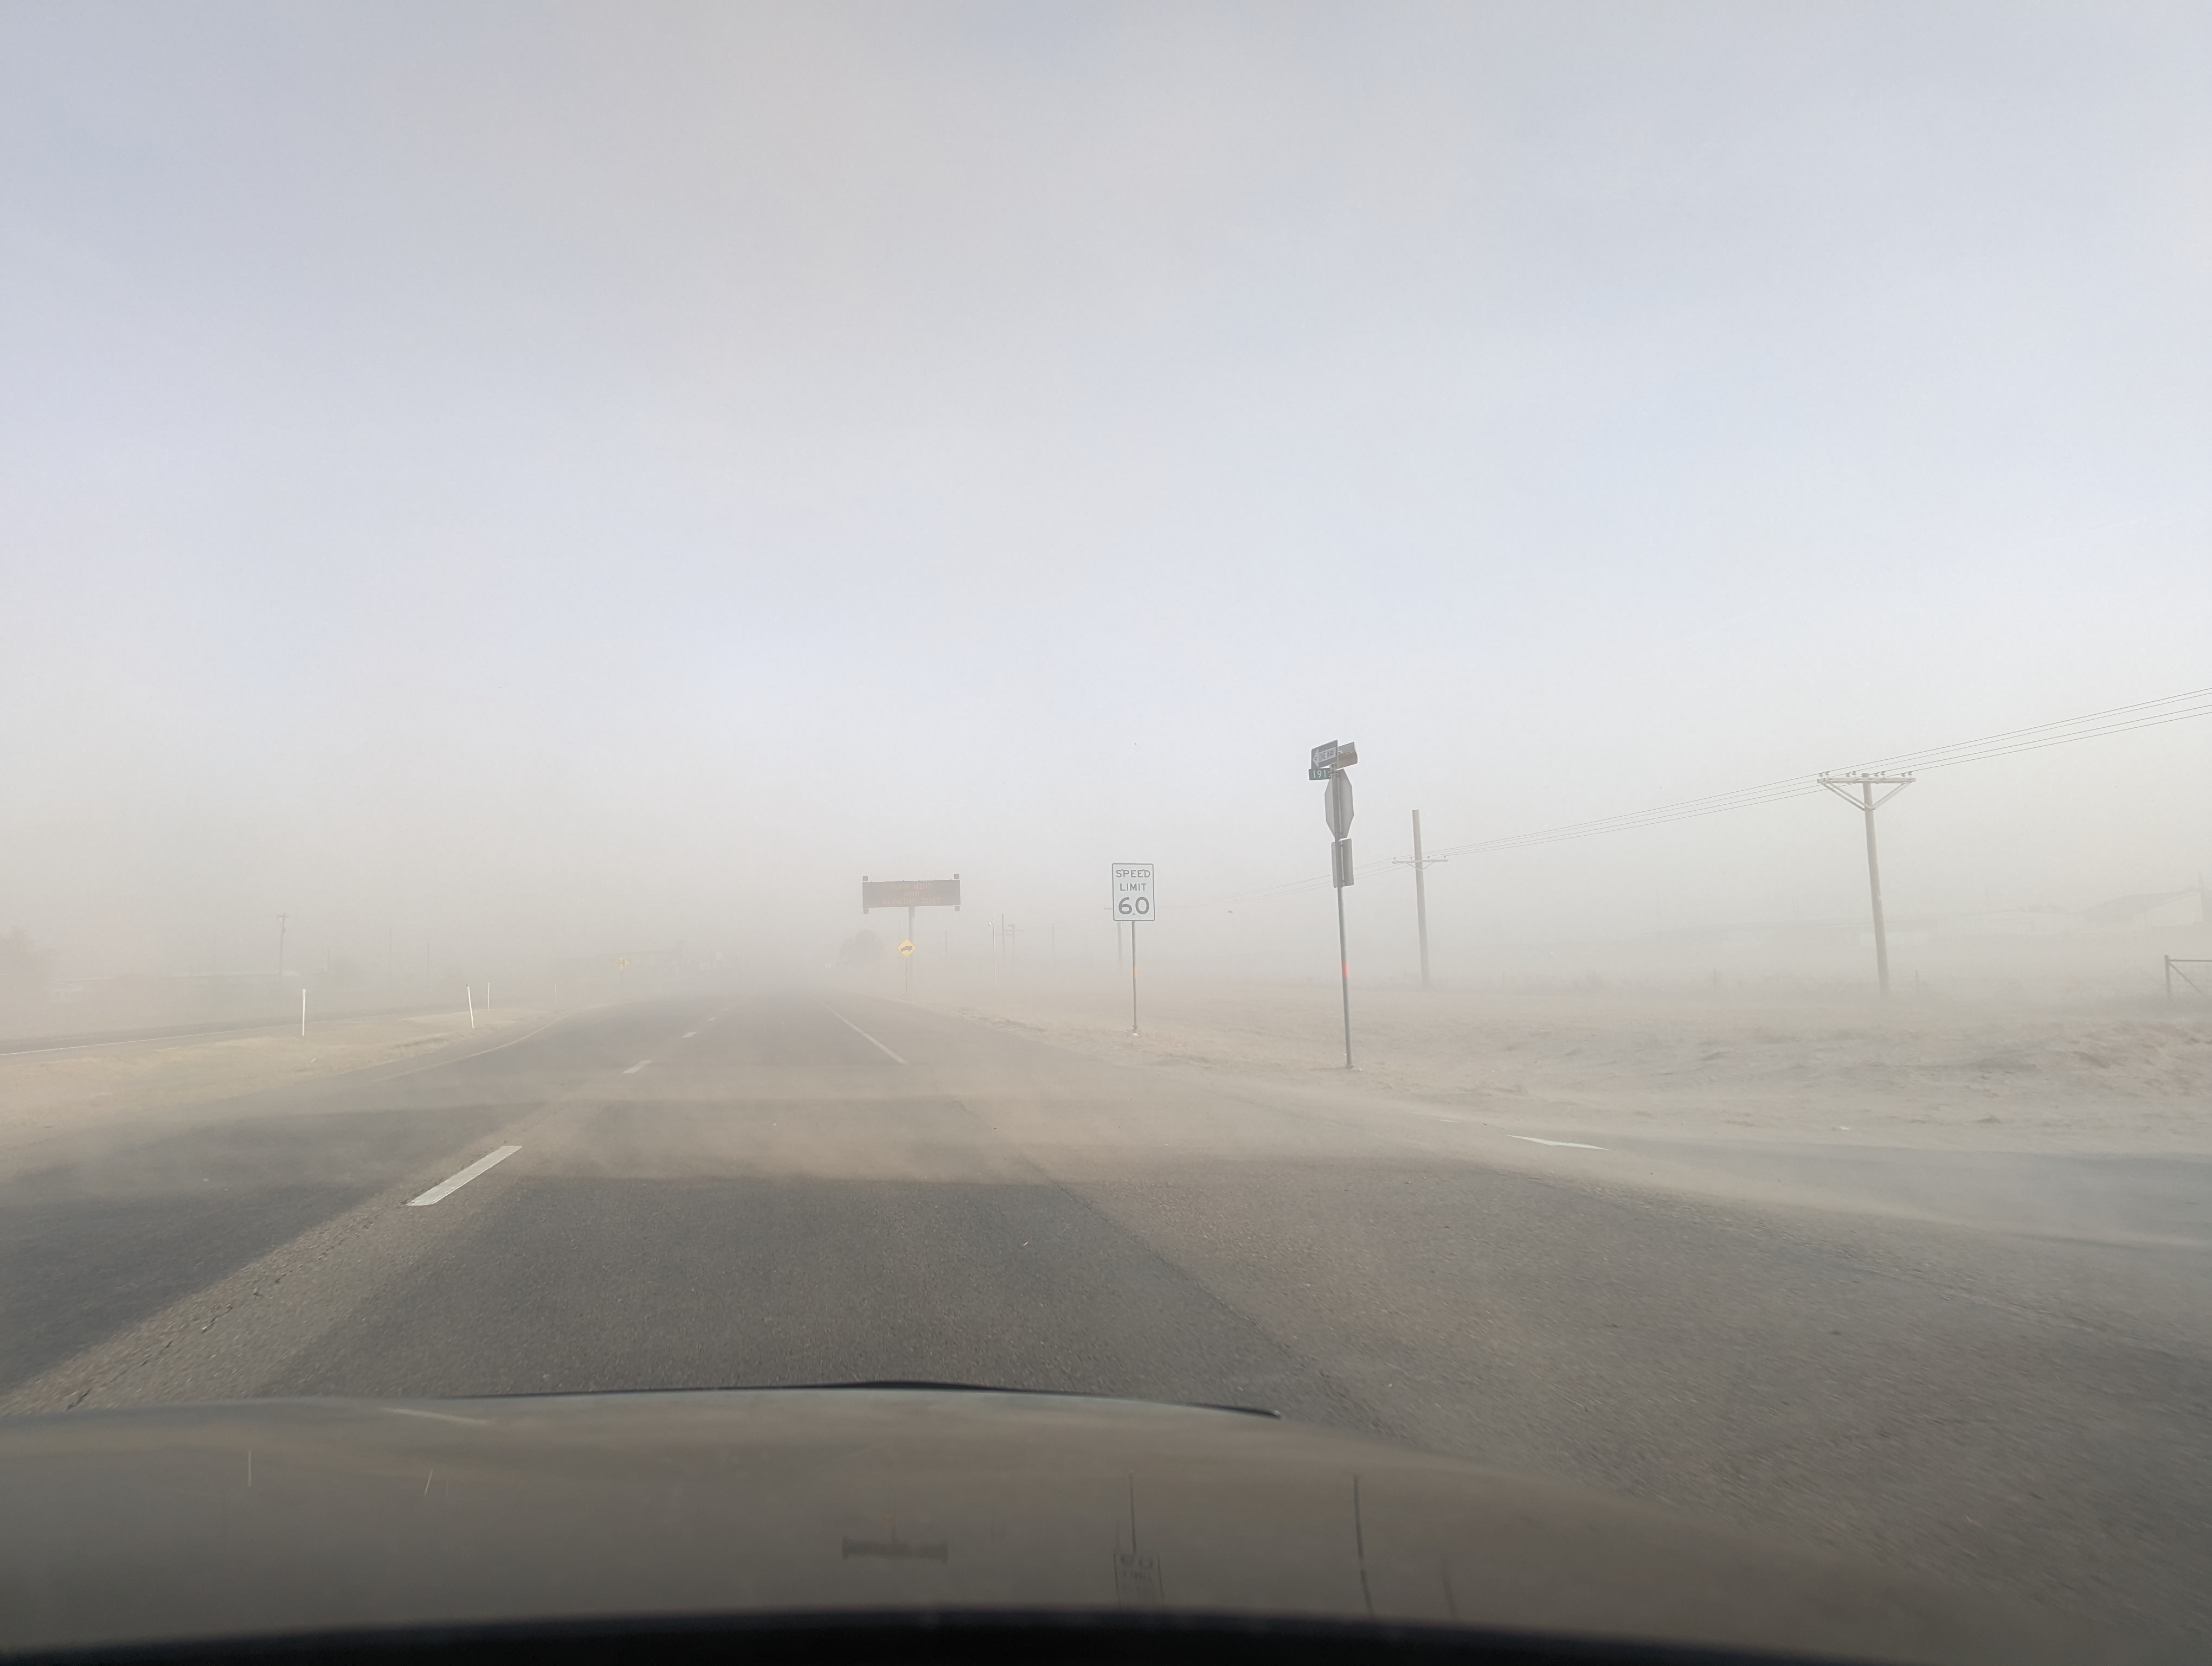 Thick blowing dust blowing across Highway 84 immediately southeast of Muleshoe late Wednesday afternoon (22 February 2023). The image is courtesy Gary Skwira.